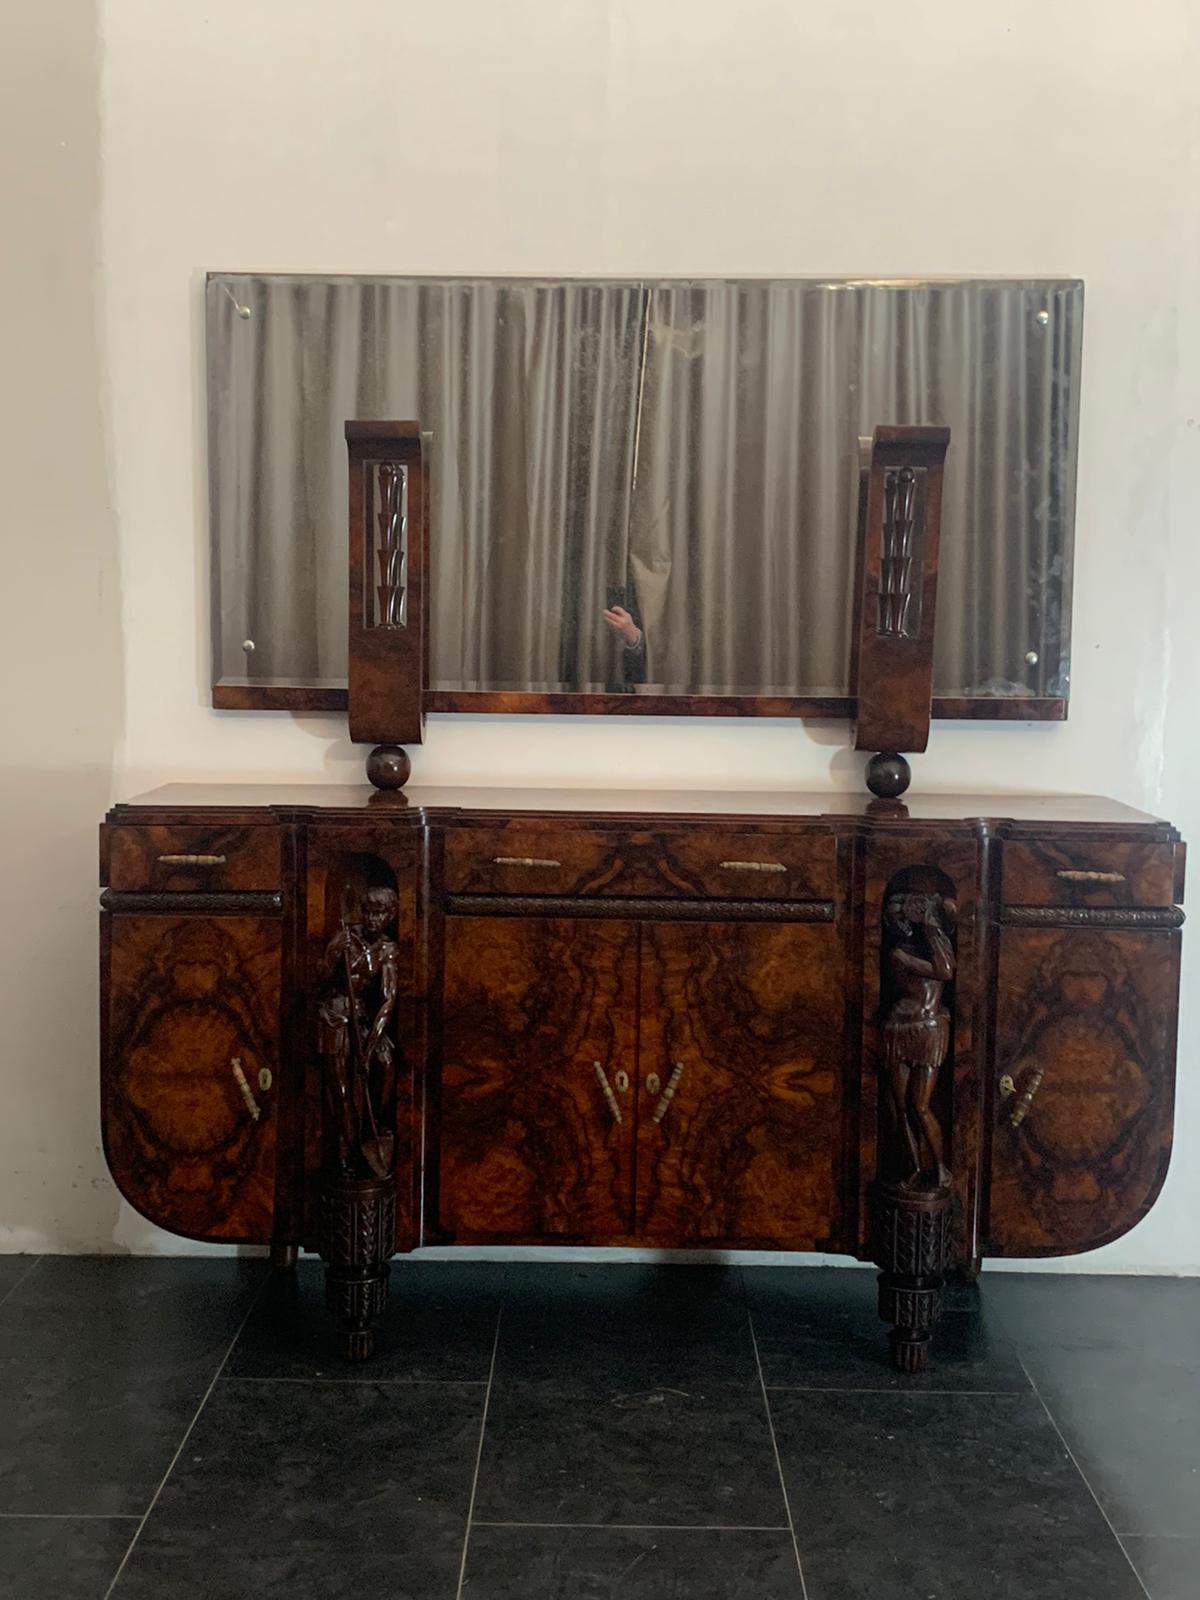 1 of 2 Prestigious Art Deco sideboards with mirror, in walnut and walnut burl on the front it has 2 niches that house masterfully carved sculptures.
On the top it has 1 decorative raised area where a mirror is housed.
Measures: Cabinet H 103 x 20